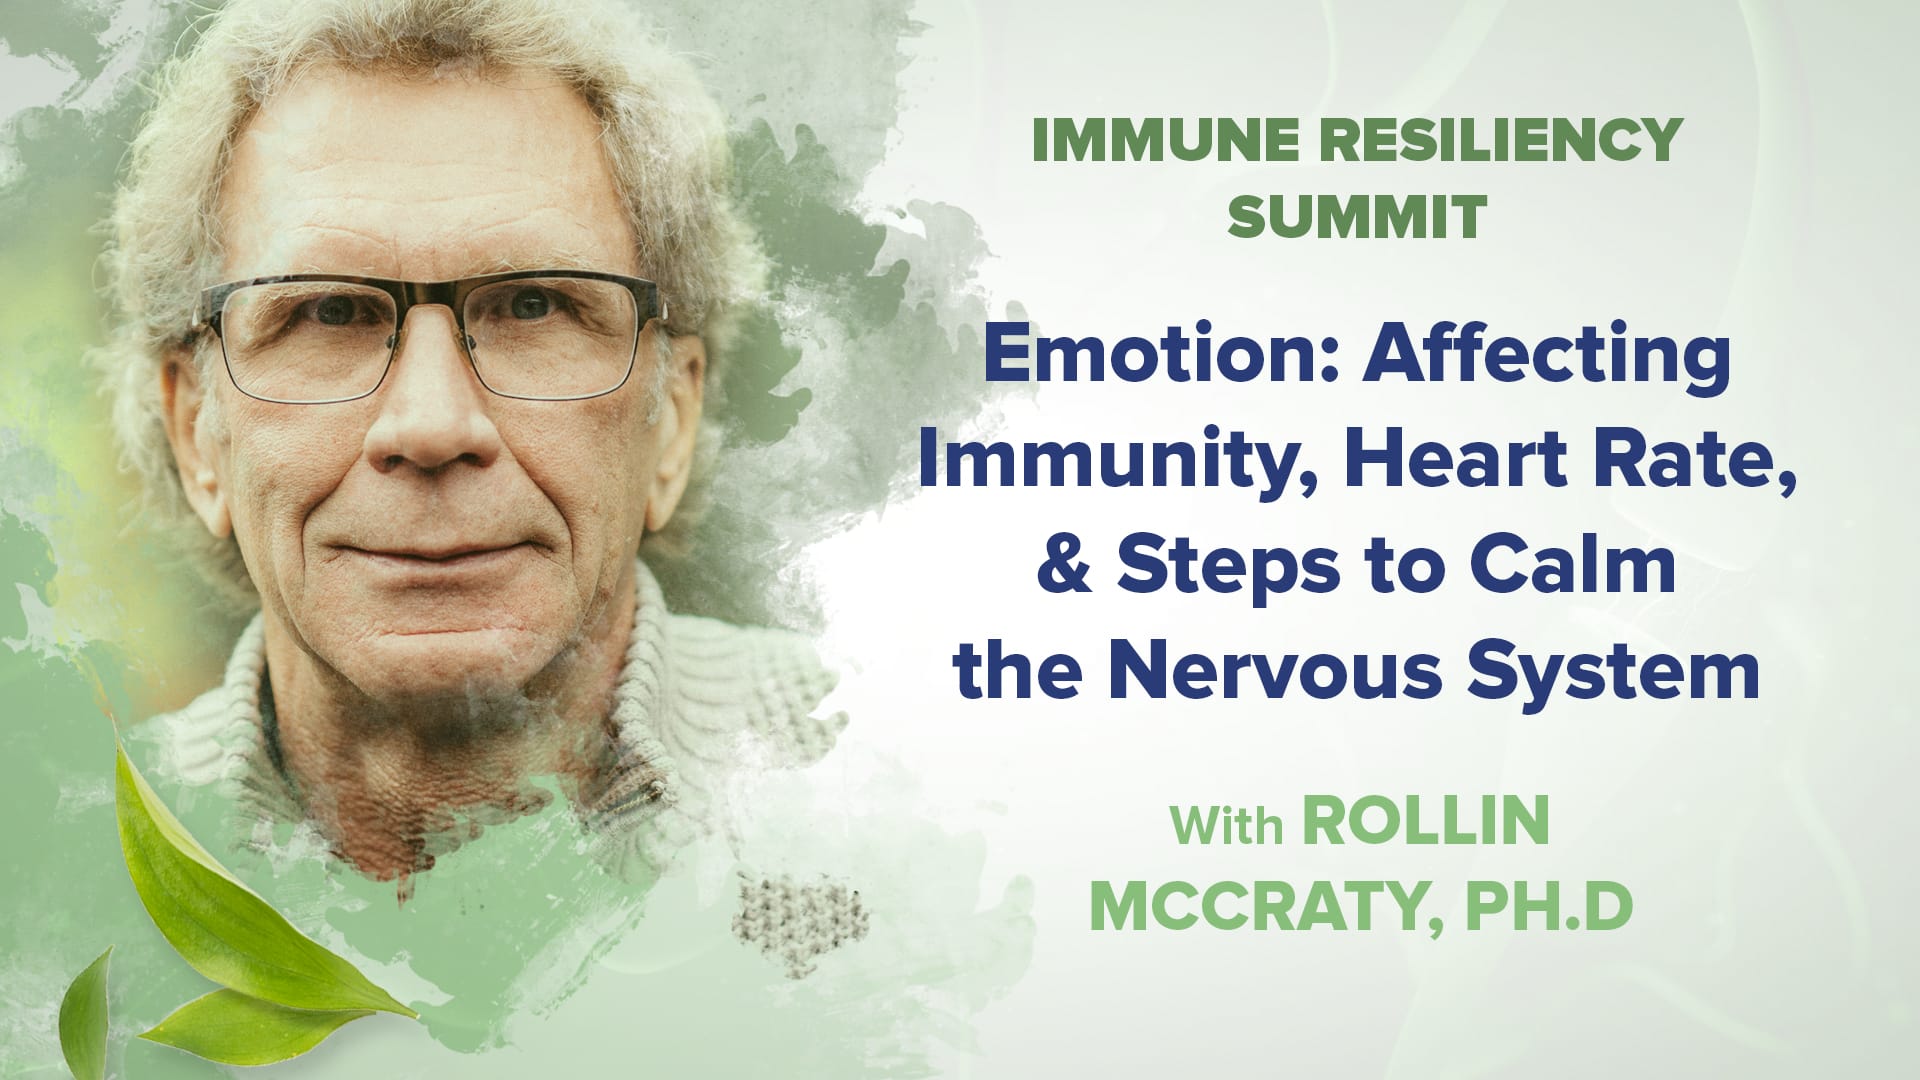 Emotion: Affecting Immunity, Heart Rate, & Steps to Calm the Nervous System